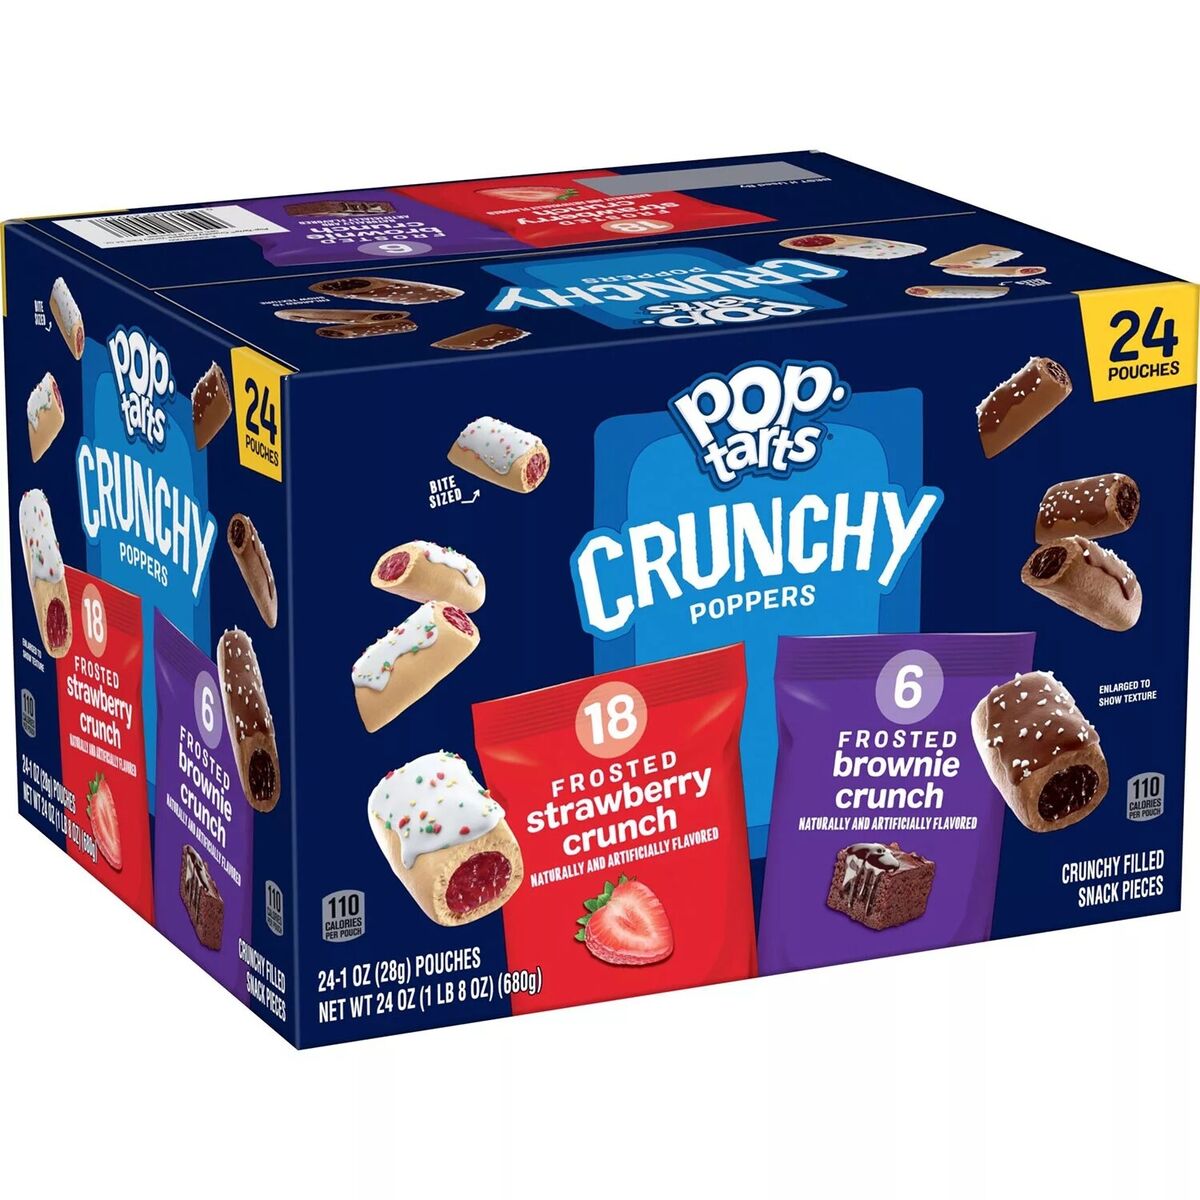 Pop-Tarts Crunchy Poppers Variety 24 Pack (680g)